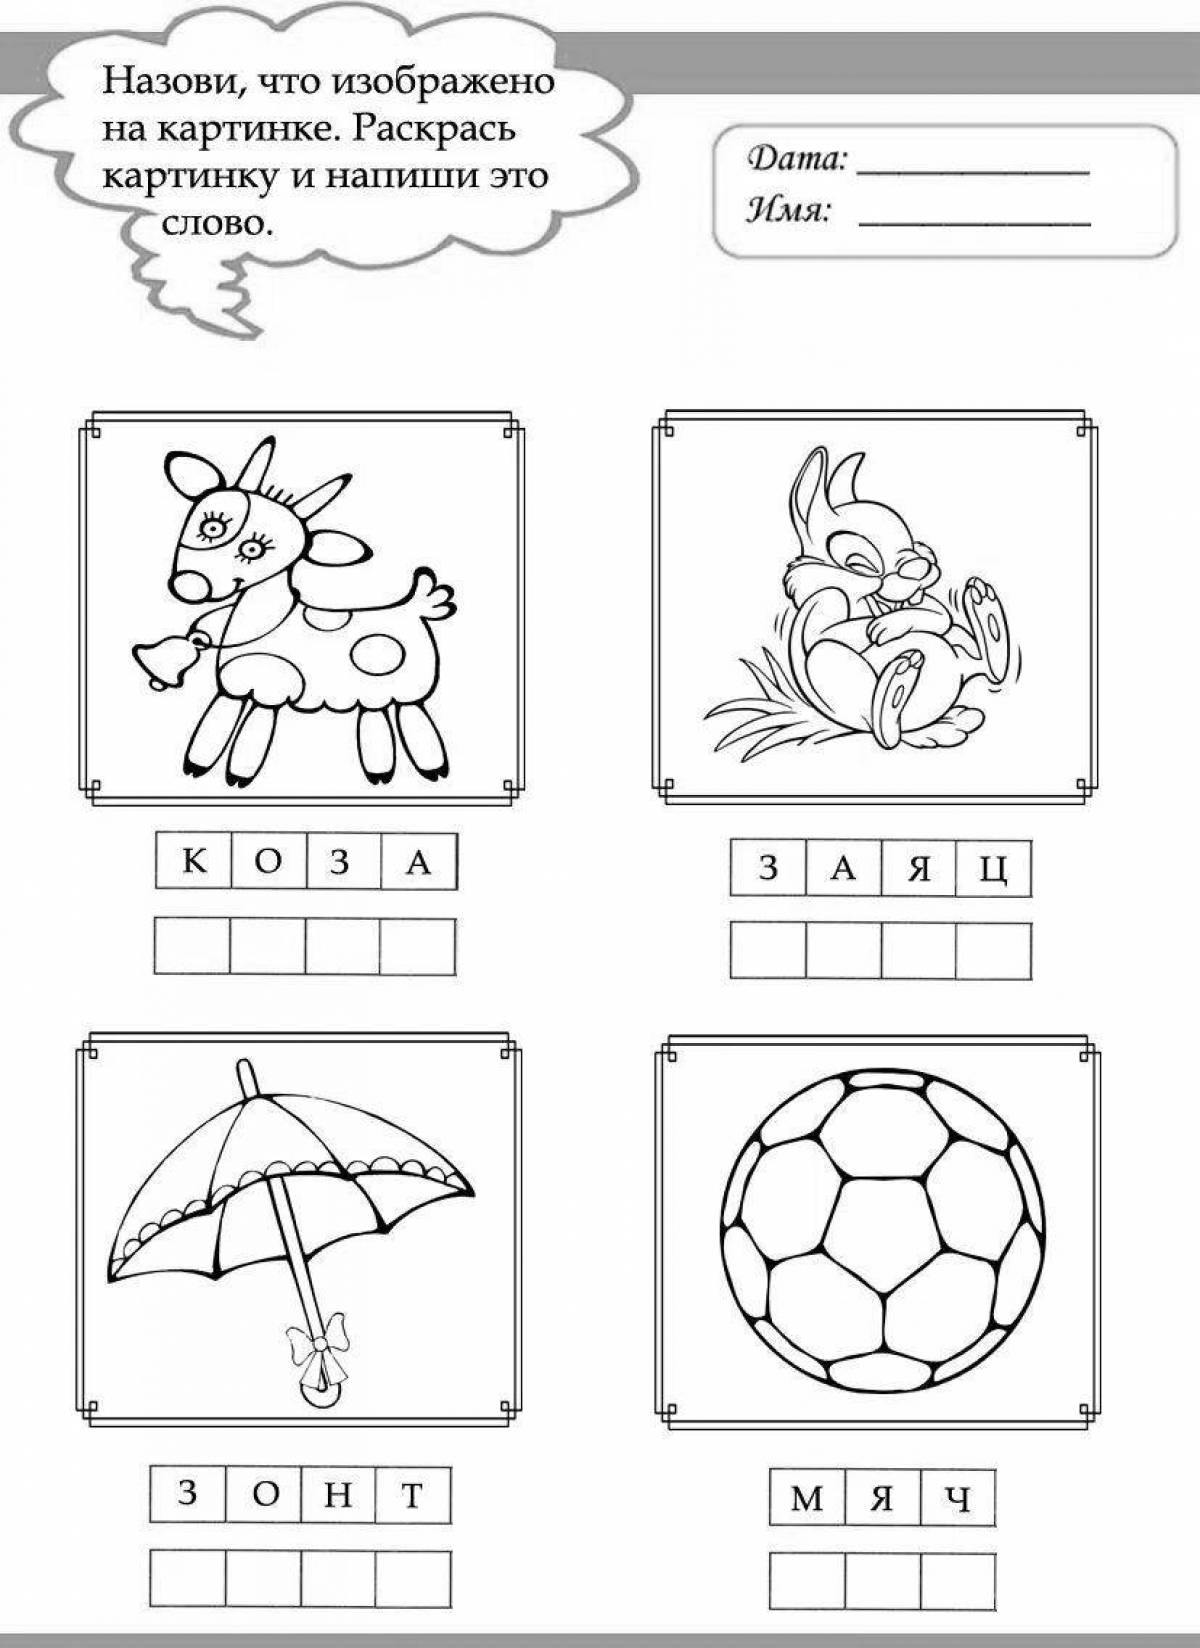 Coloring book for 1st grade students